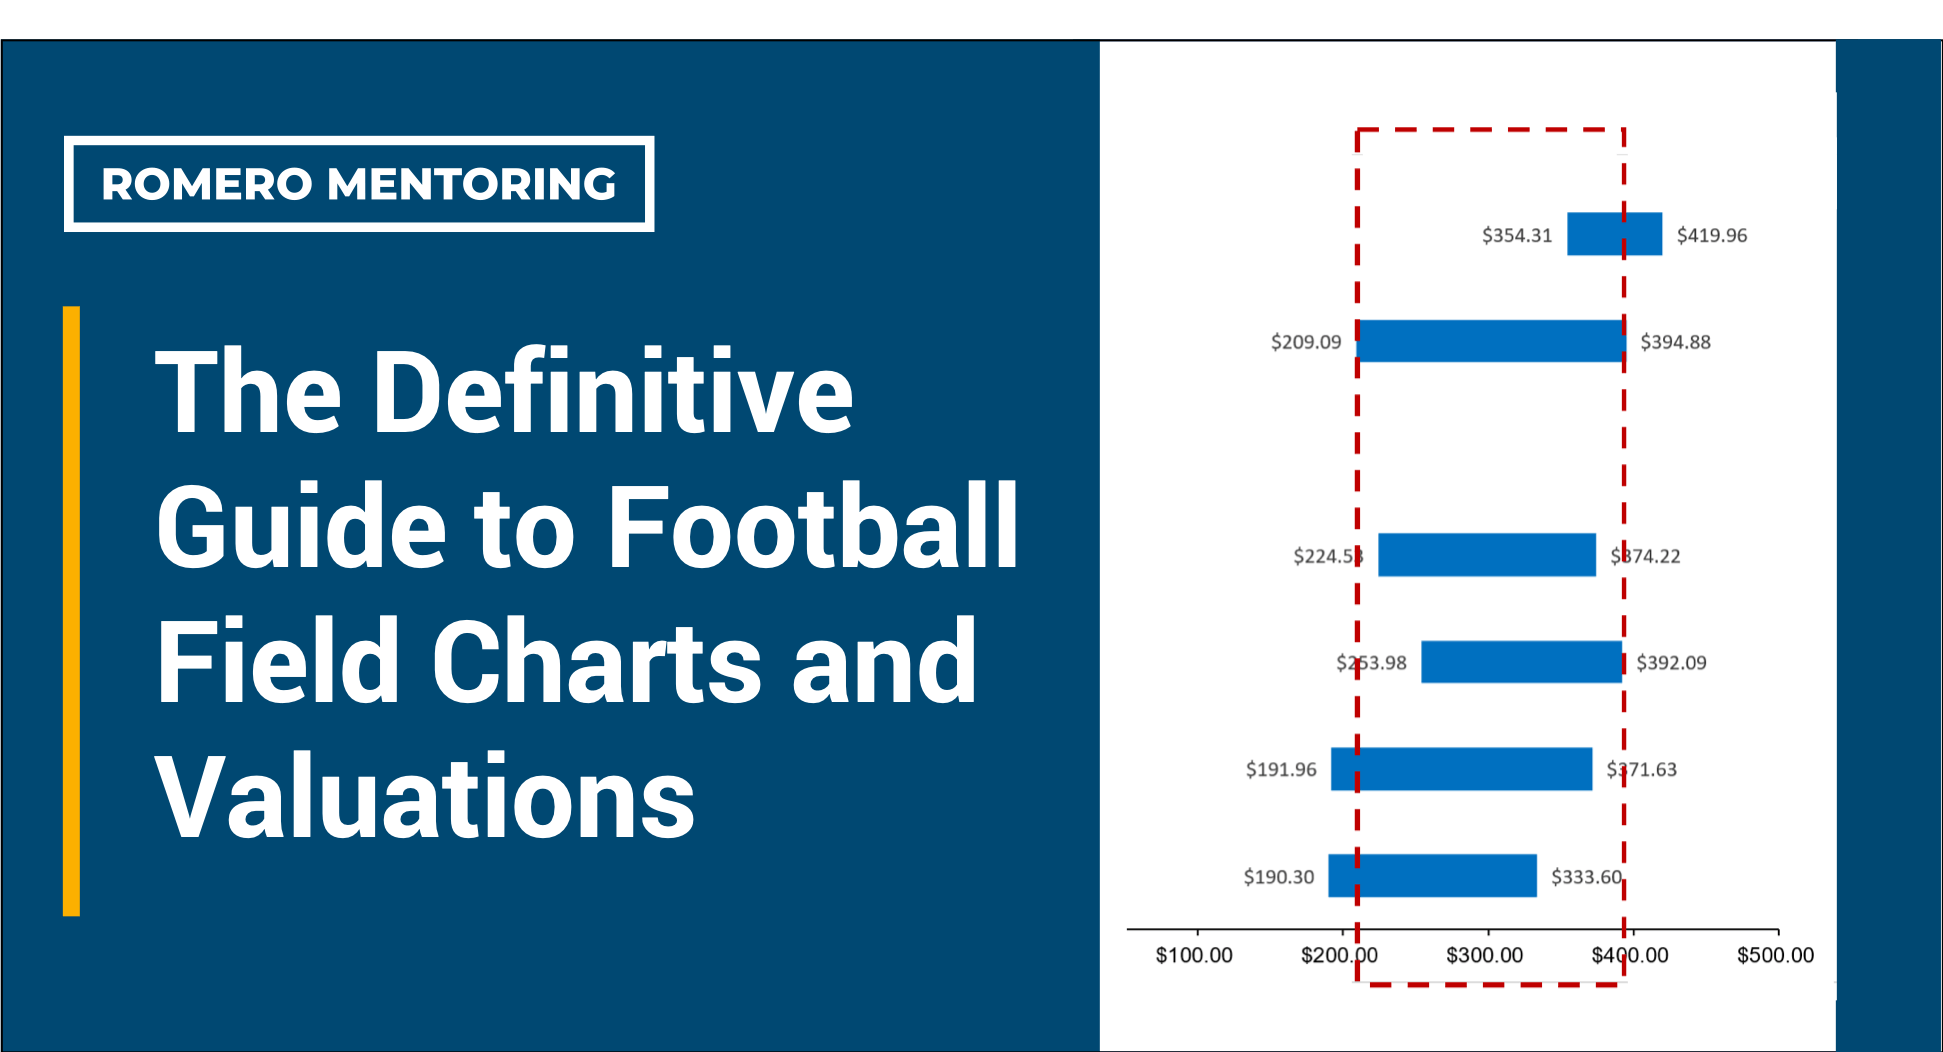 The Definitive Guide to Football Field Charts and Valuations